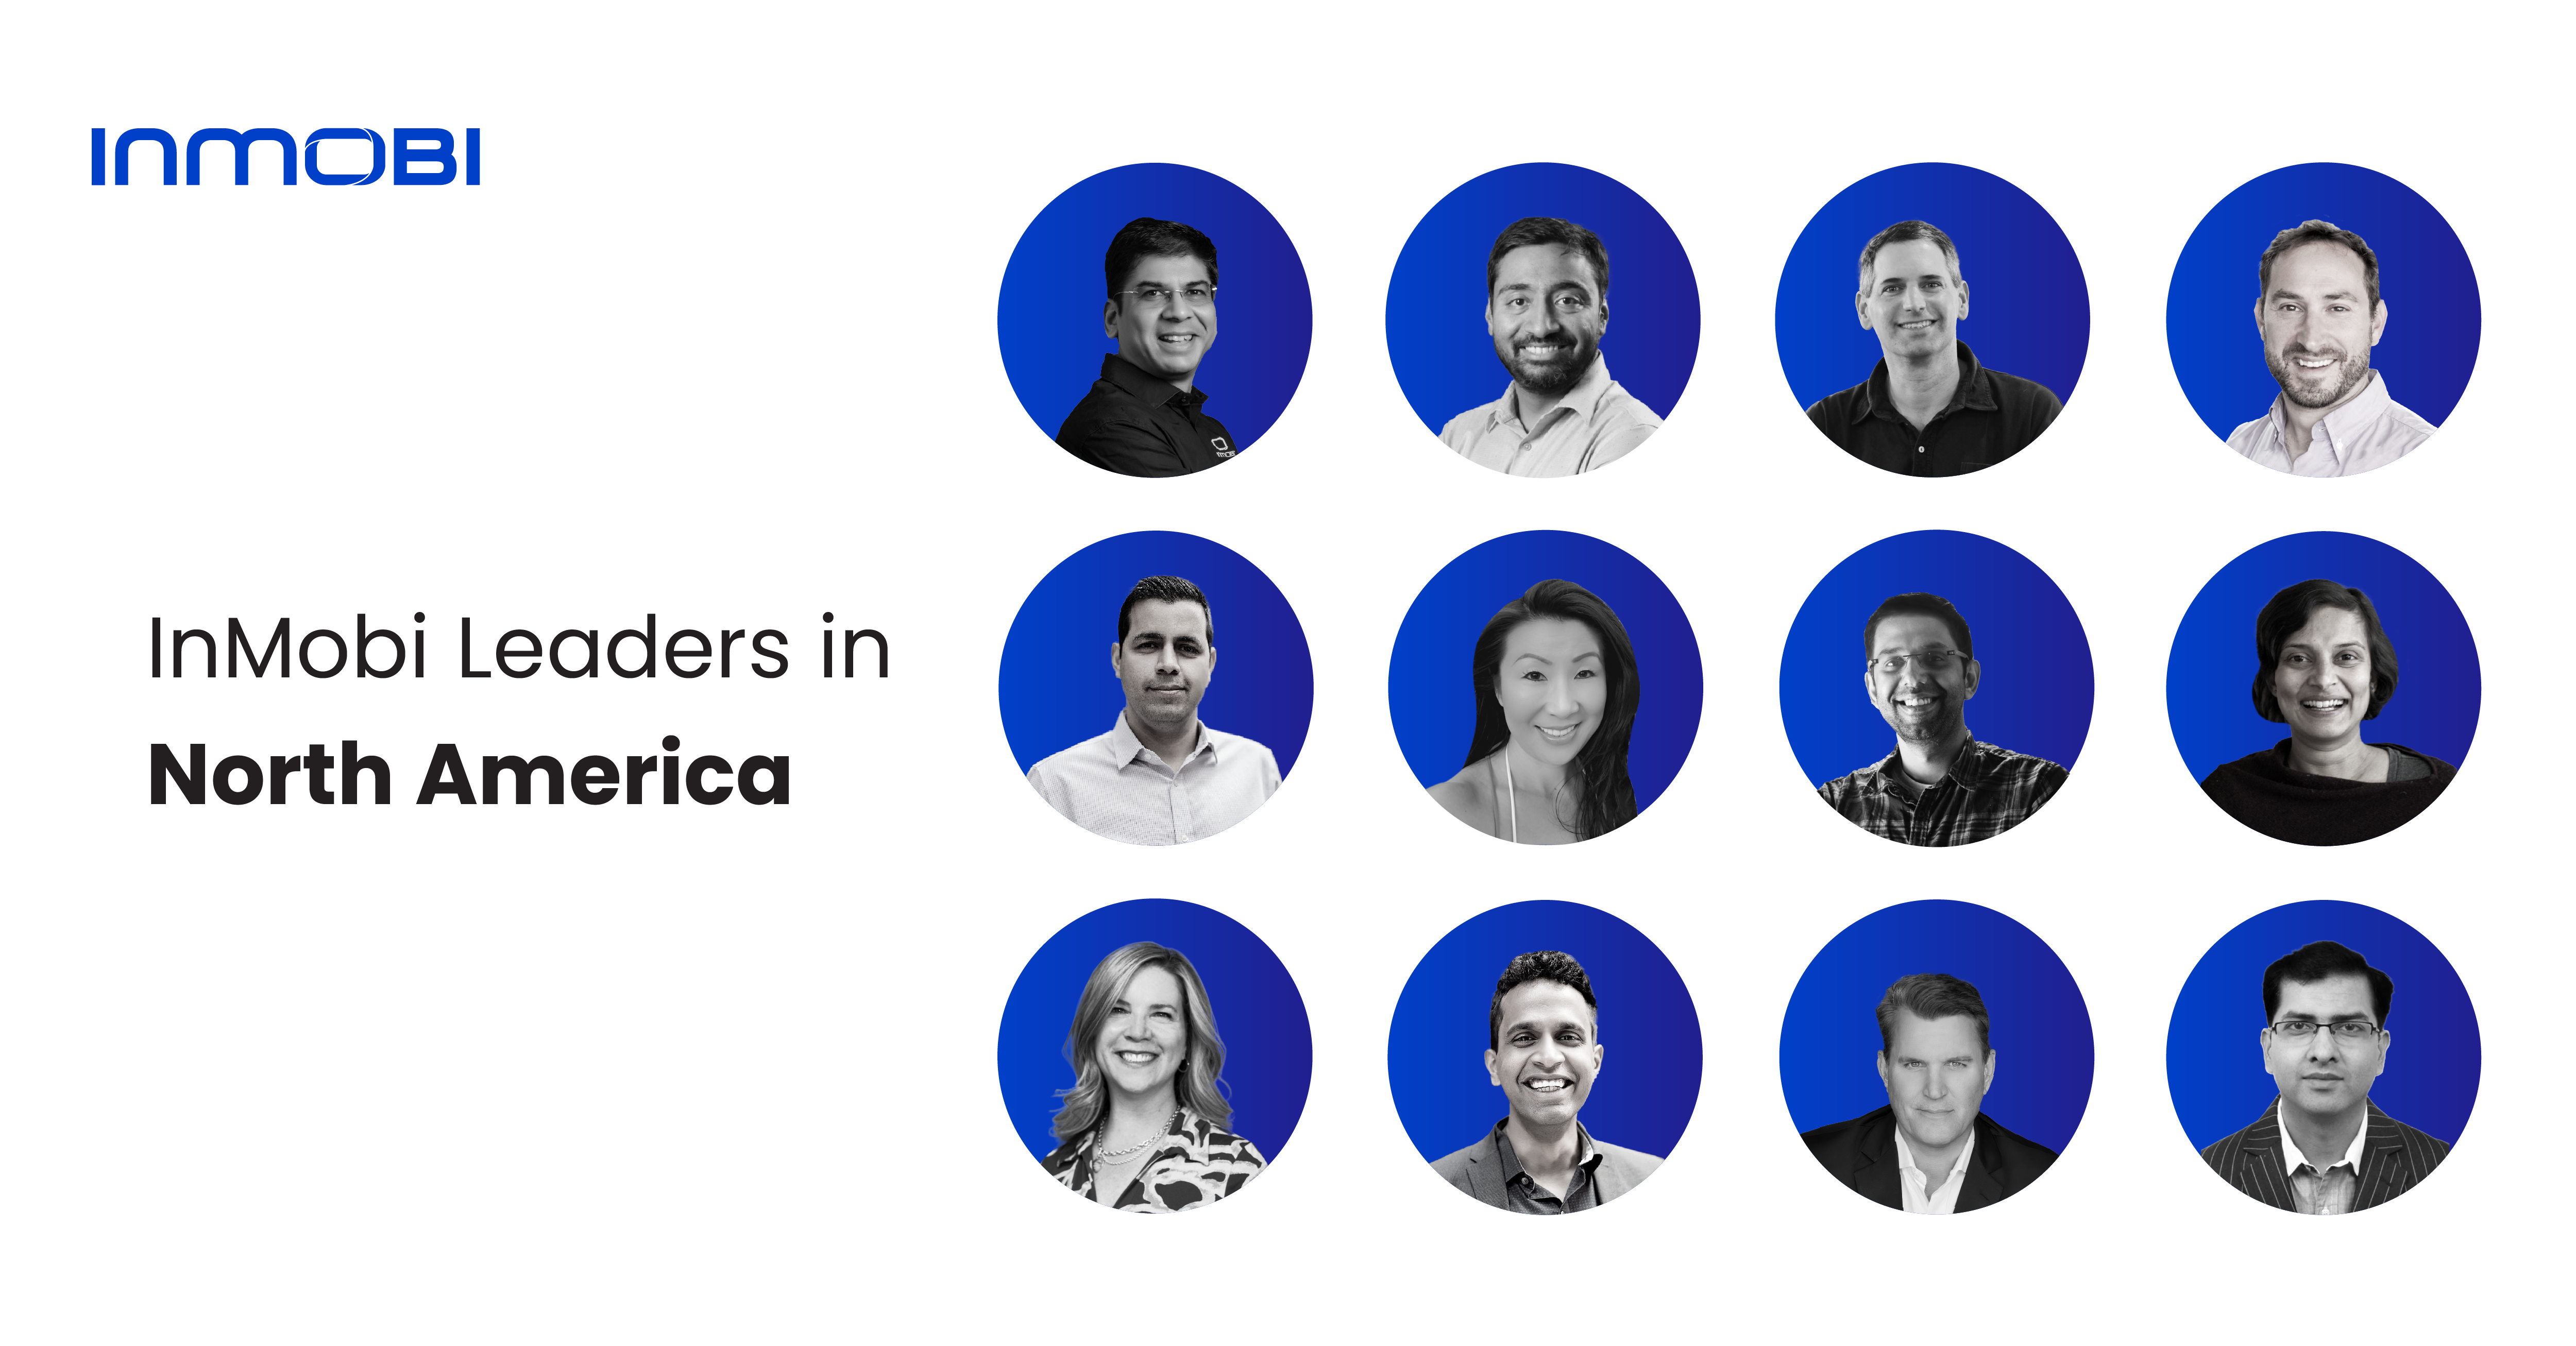 Get To Know InMobi’s Leaders in North America